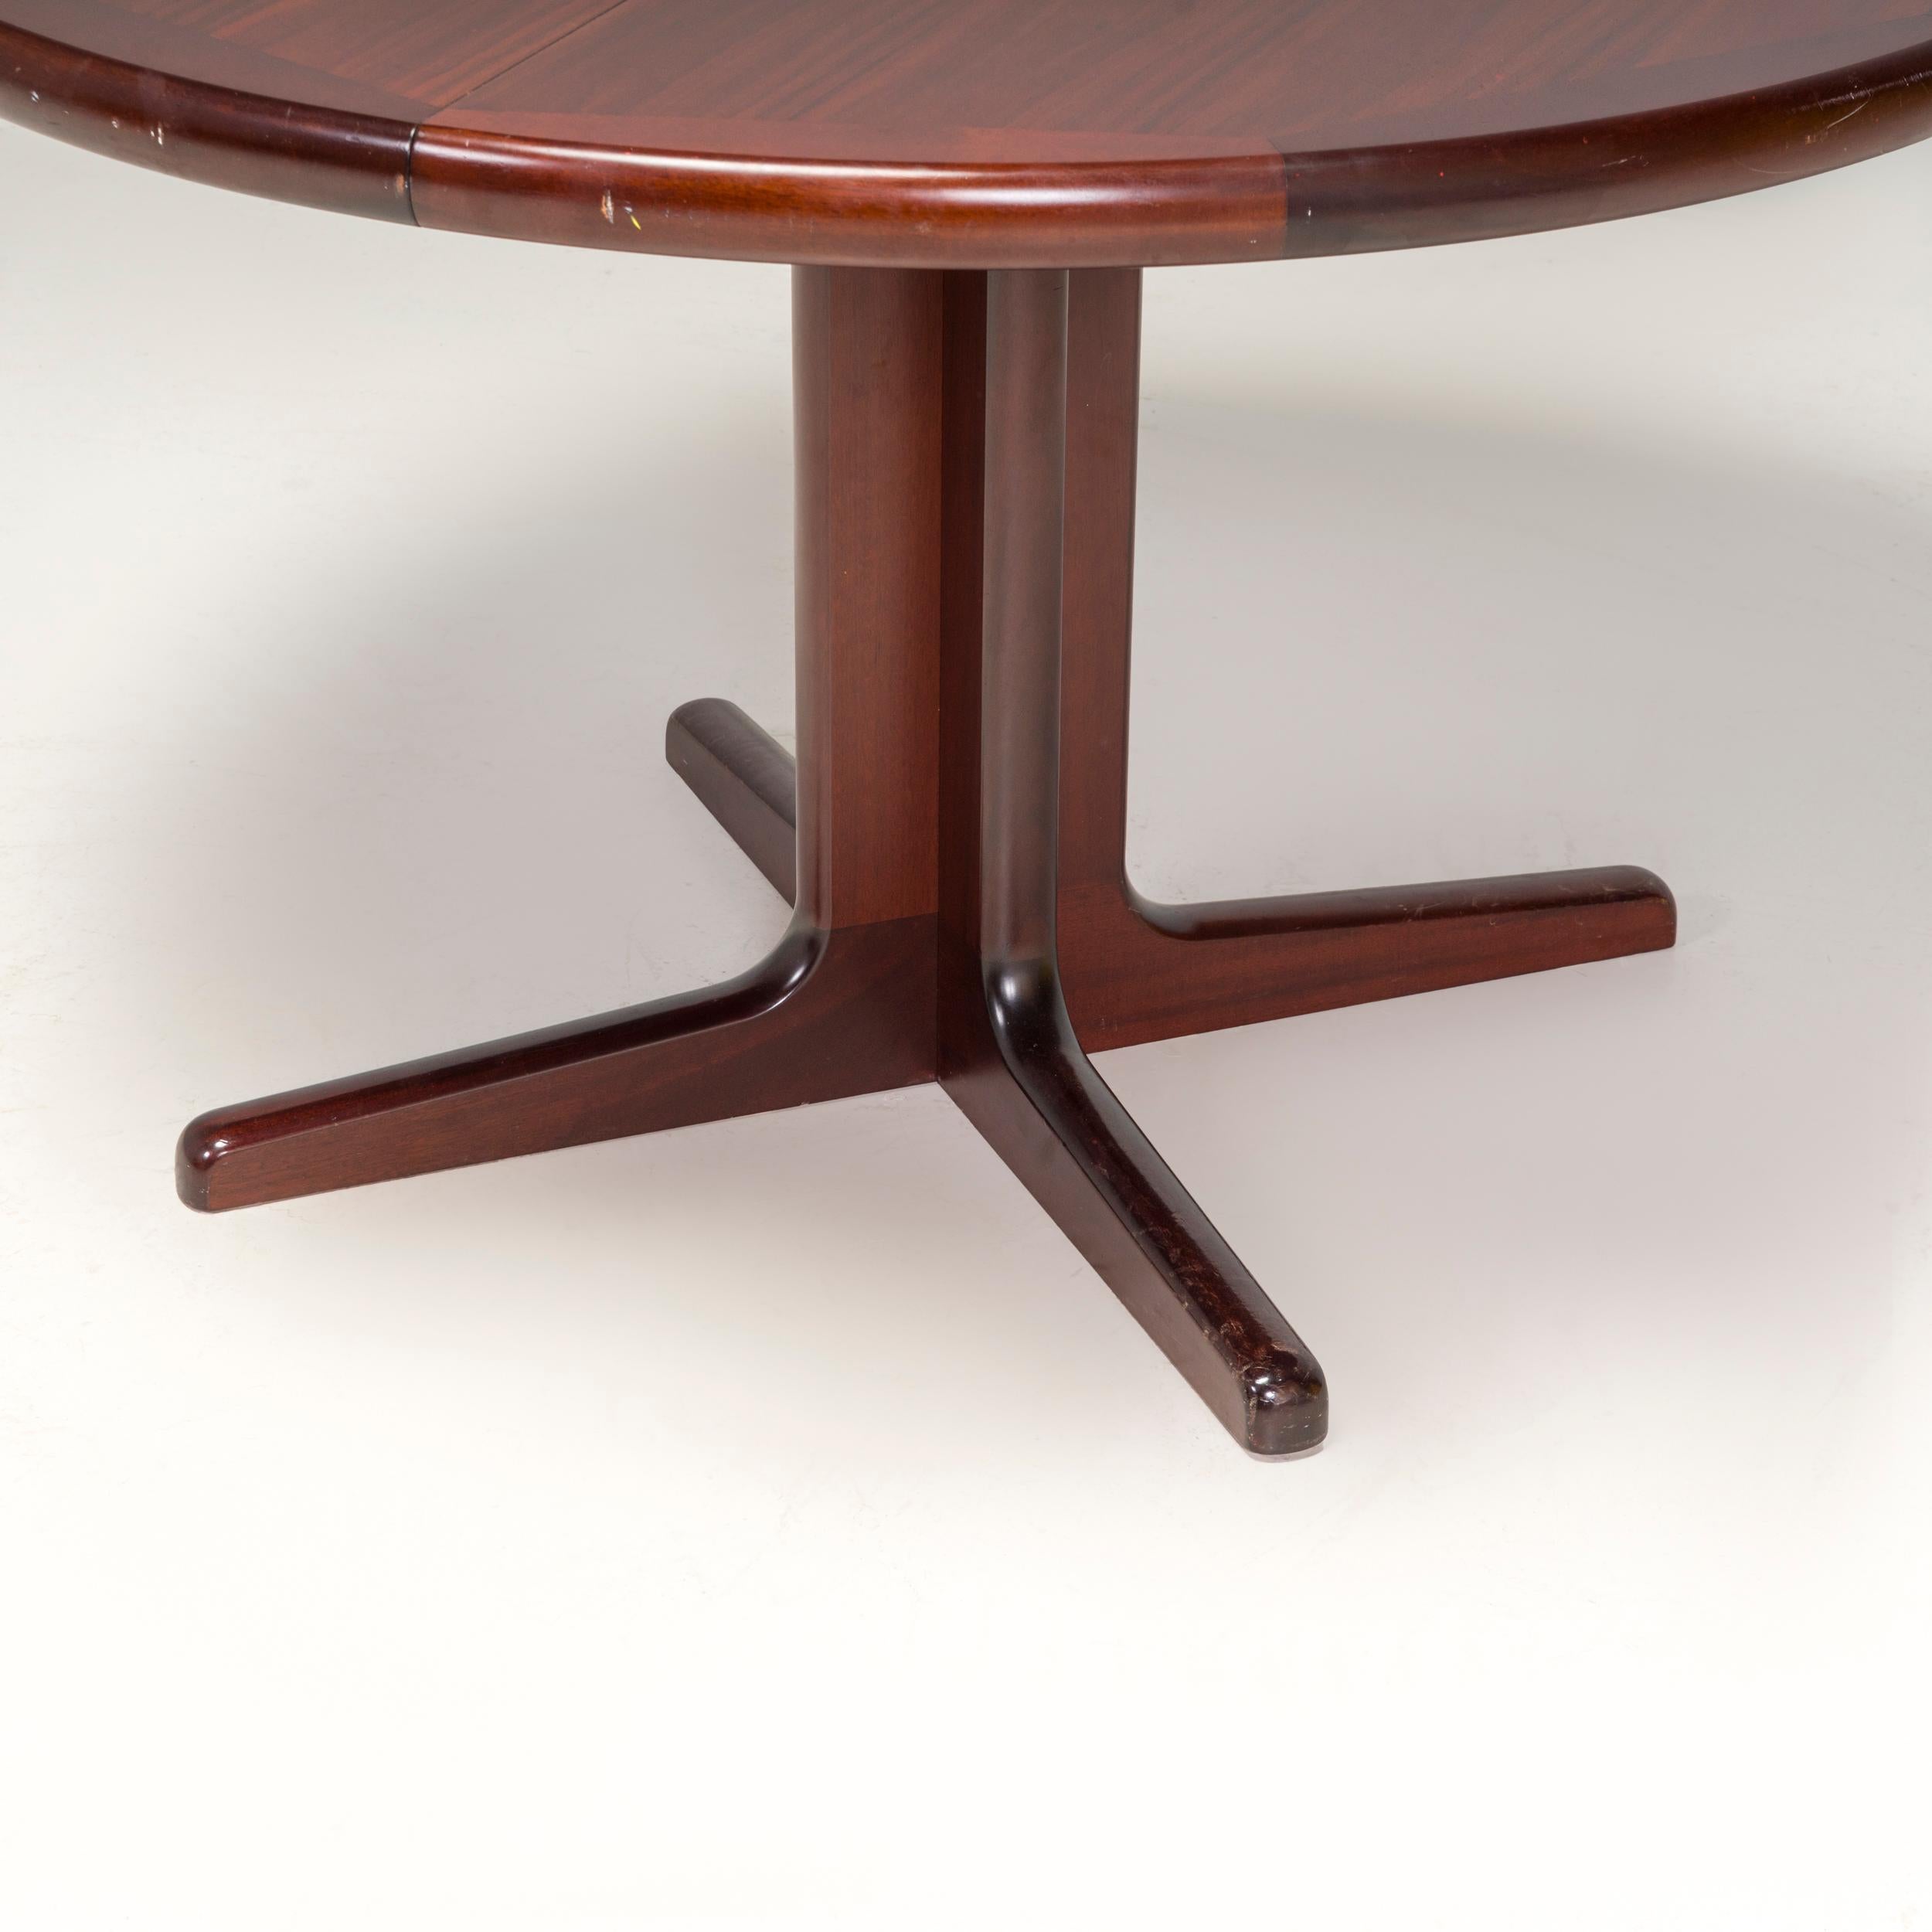 This dining table is a classic example of Mid-Century Modern design.

Constructed from rosewood, the dining table has a circular table top sitting on two sets of v-shaped legs, which create a four star base when not extended.

Two additional